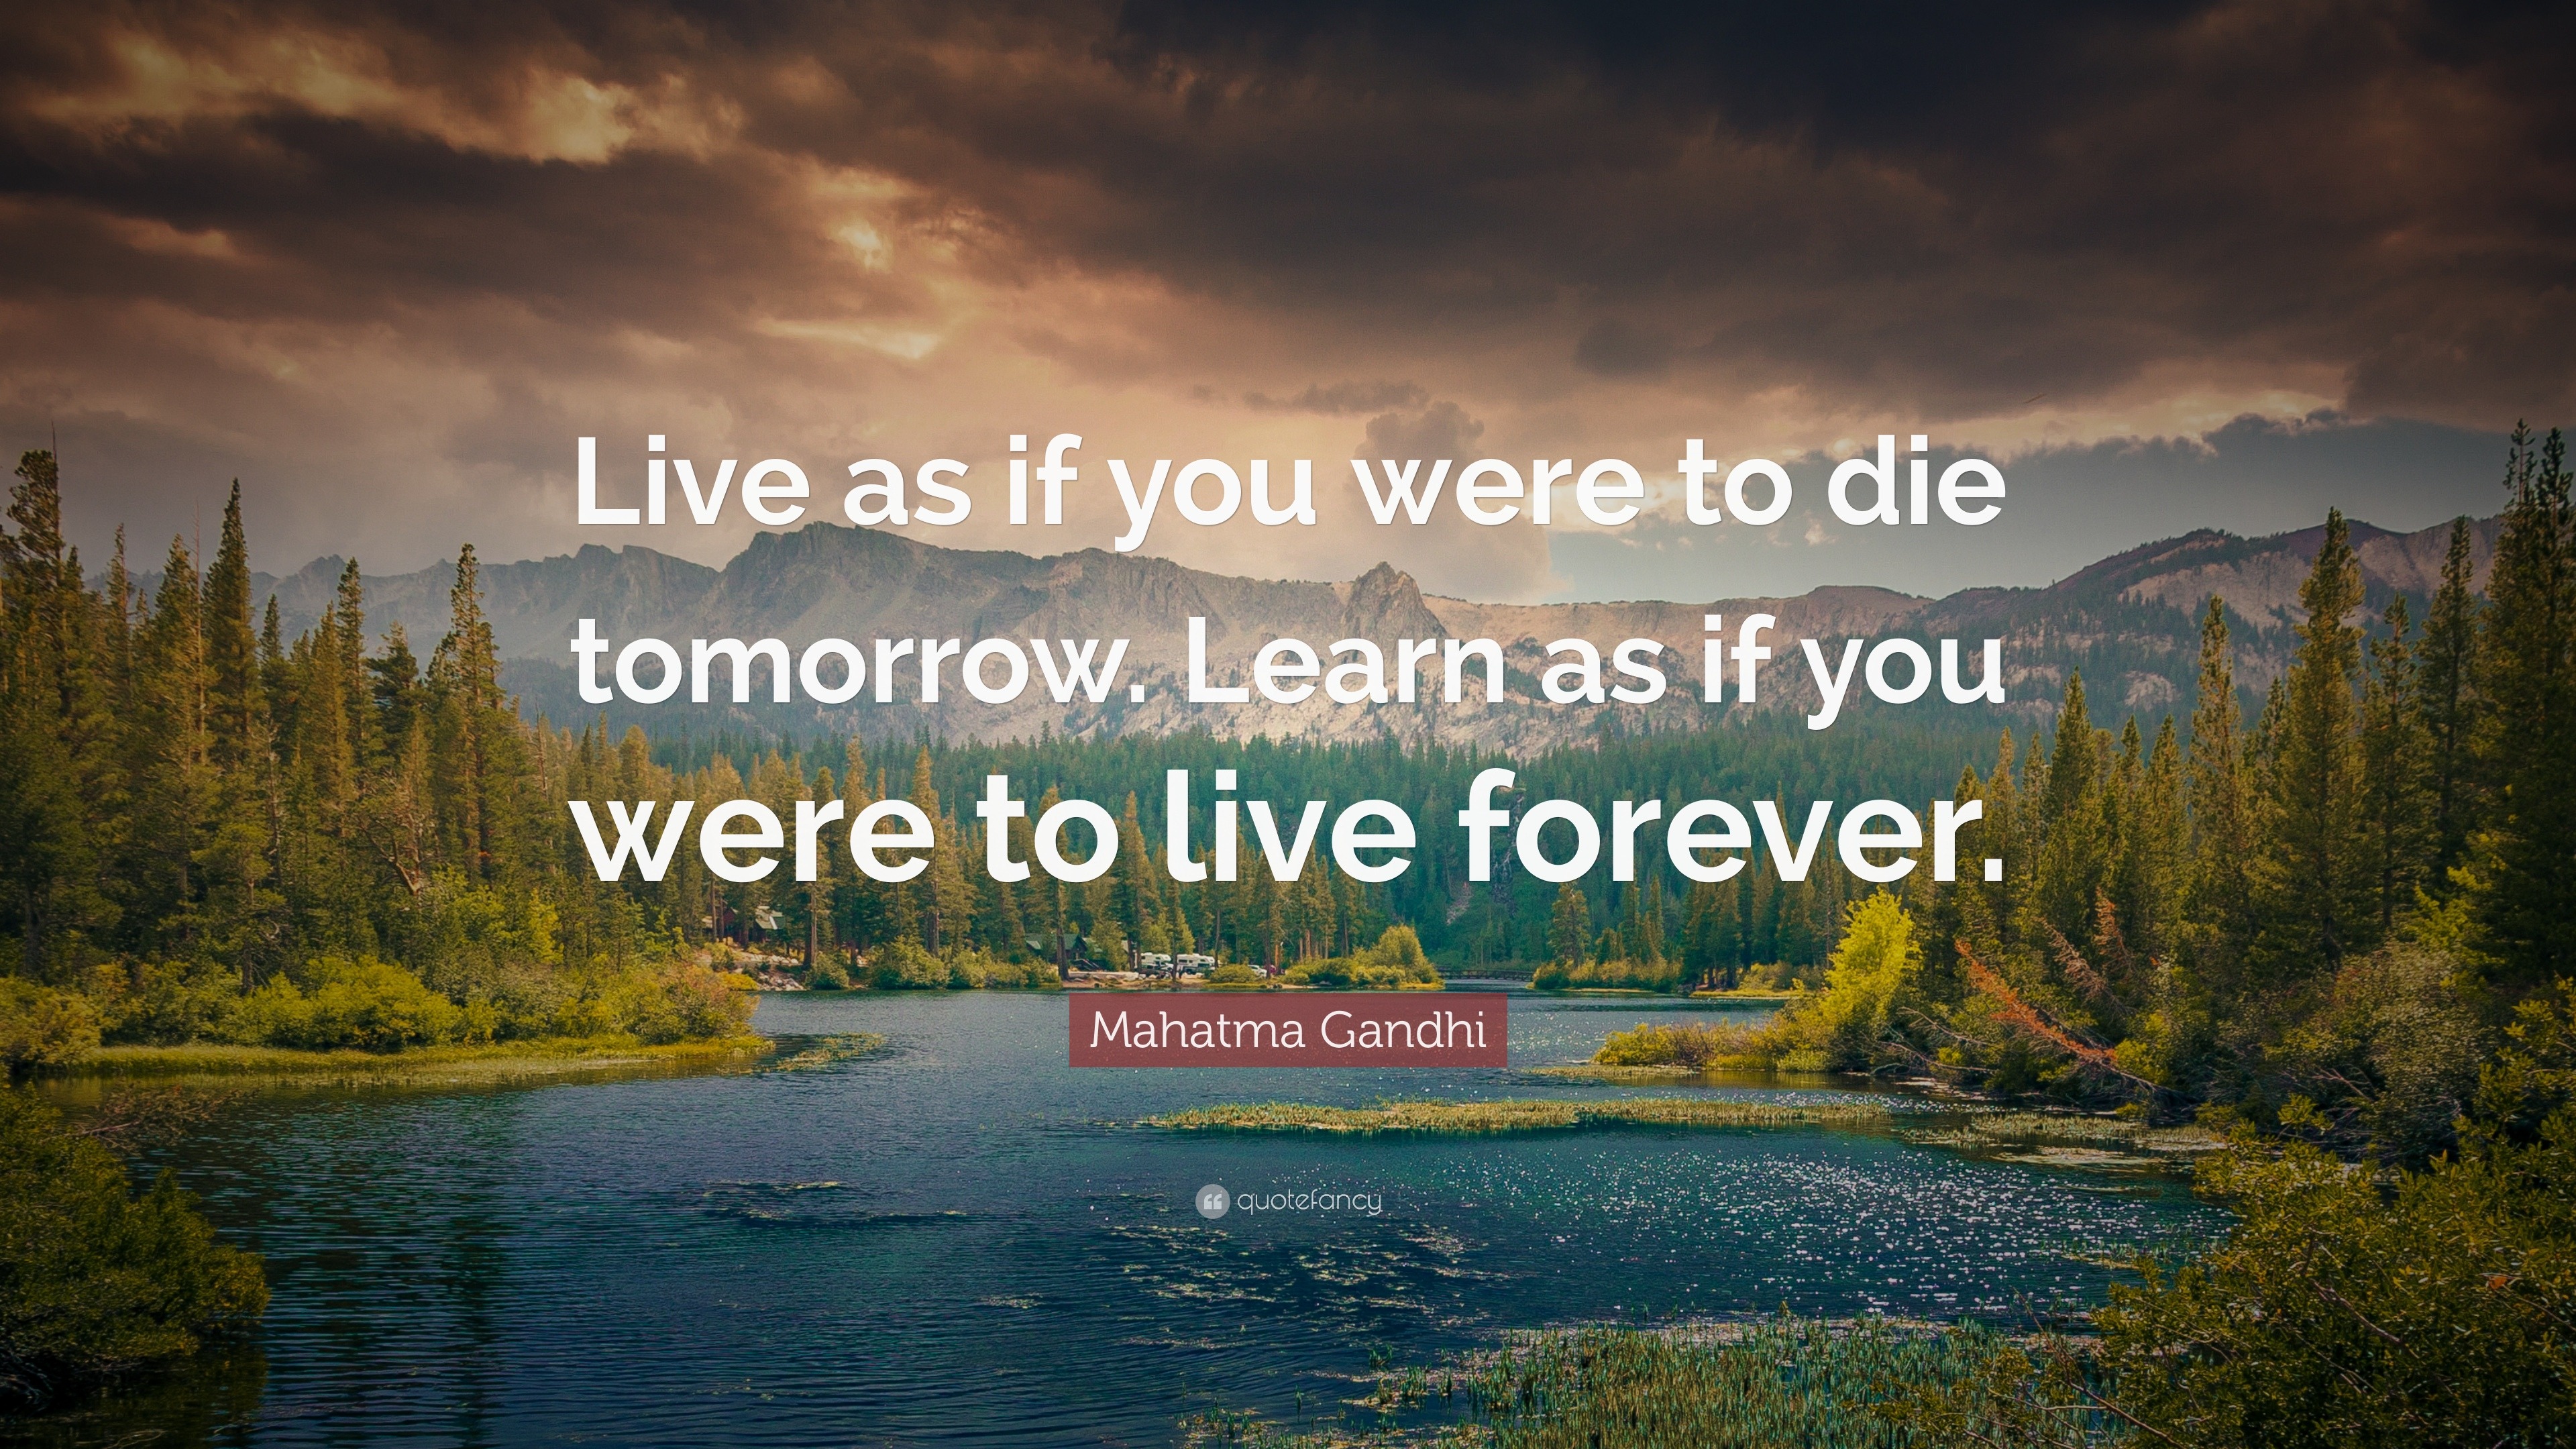 Mahatma Gandhi Quote: "Live as if you were to die tomorrow ...